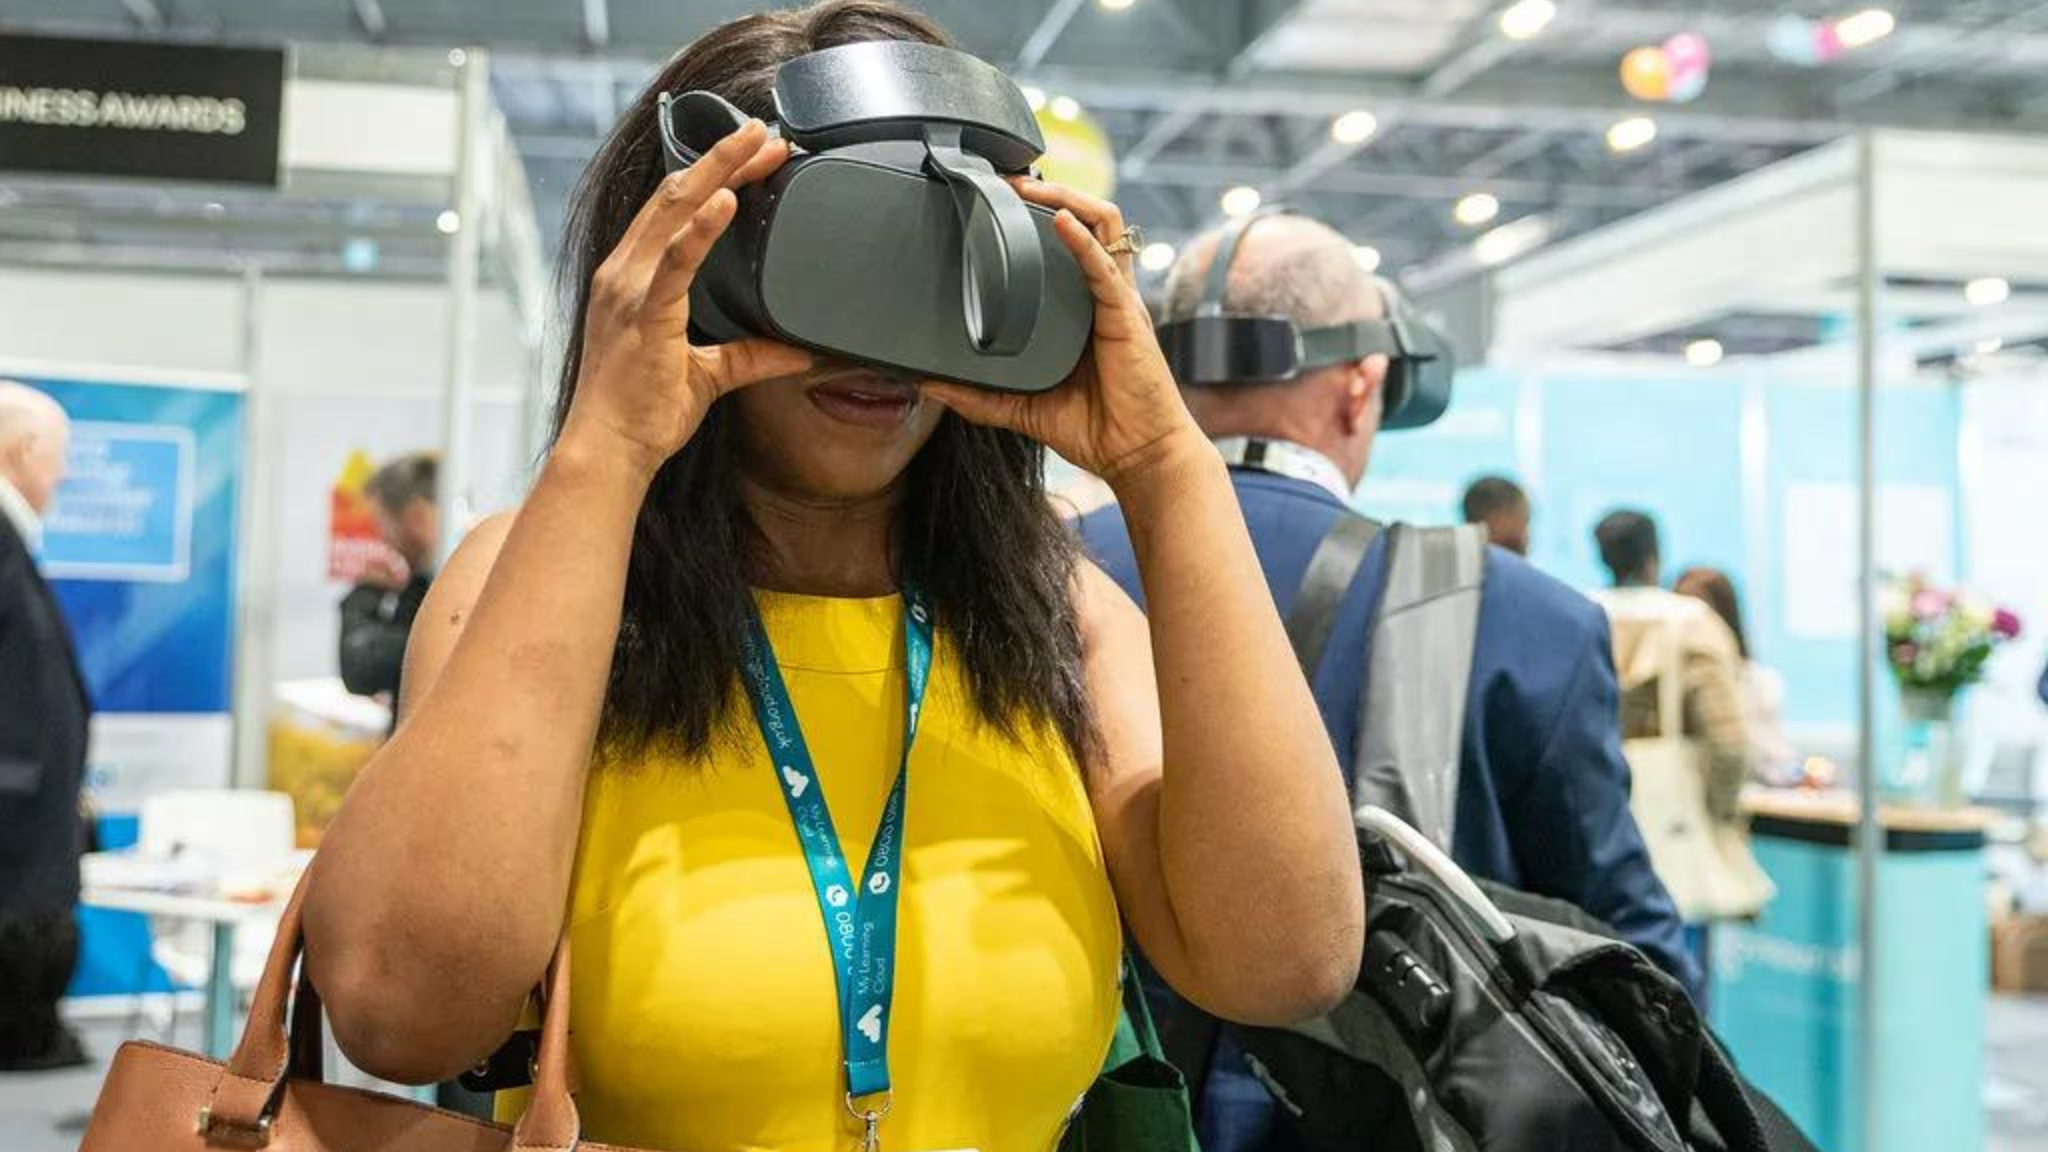 Women trialling VR at the event